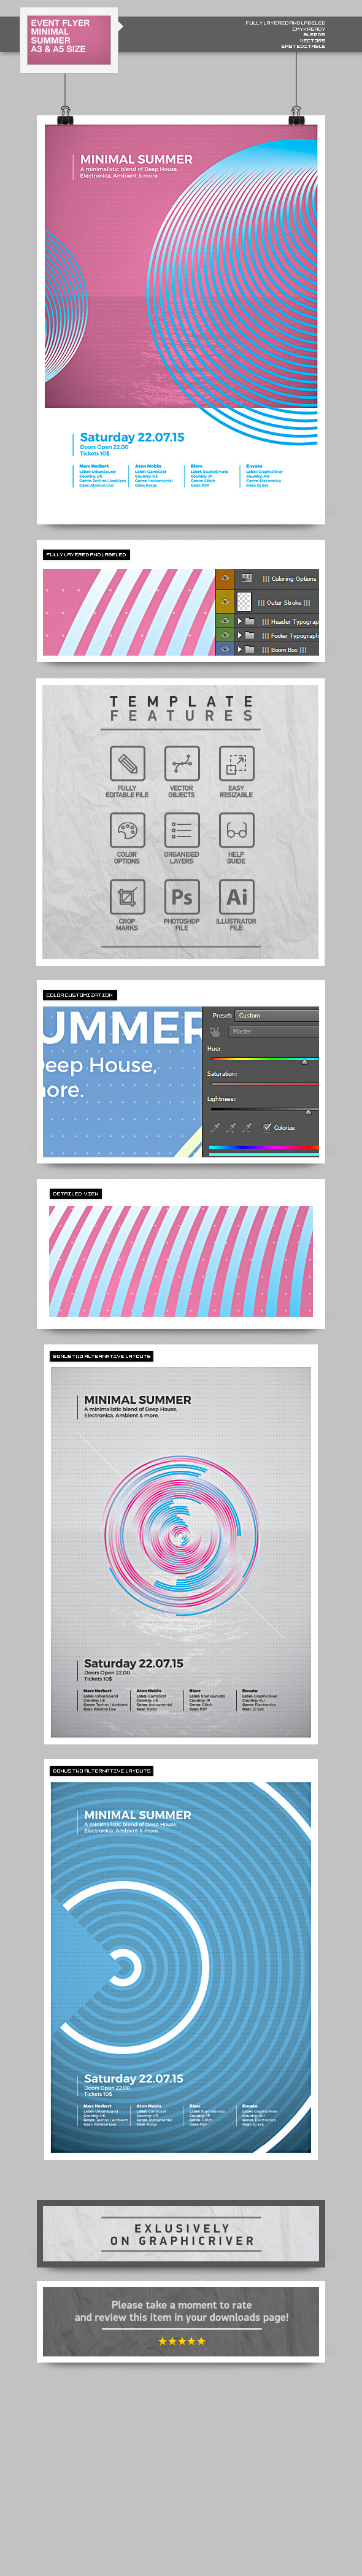 House music lounge minimal party Pool poster Promotion psd template summer Sun techno template waves wireframe